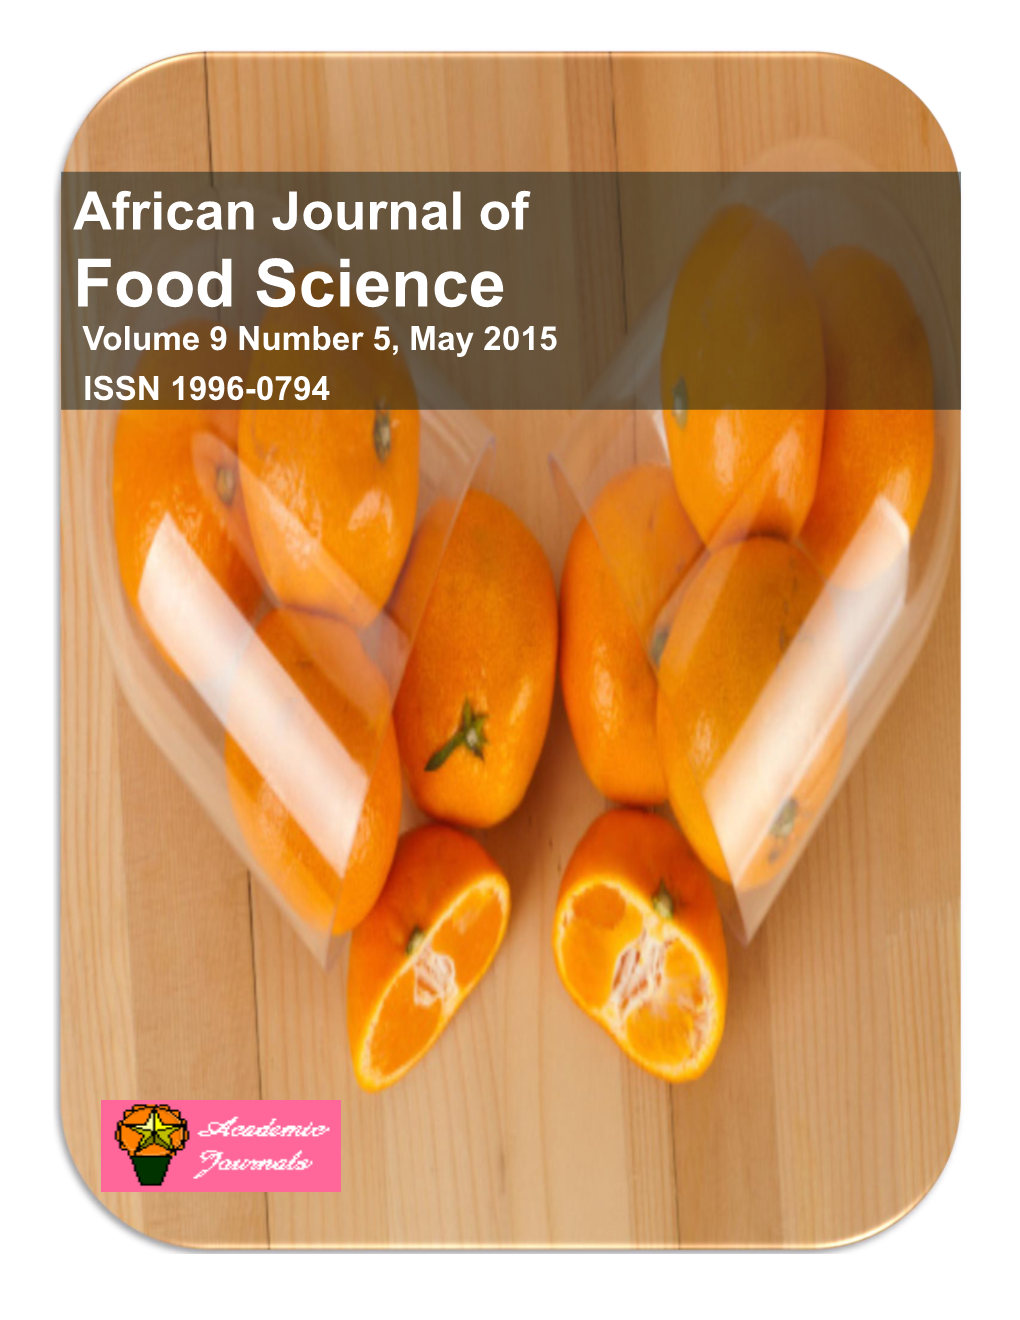 Food Science Volume 9 Number 5, May 2015 ISSN 1996-0794